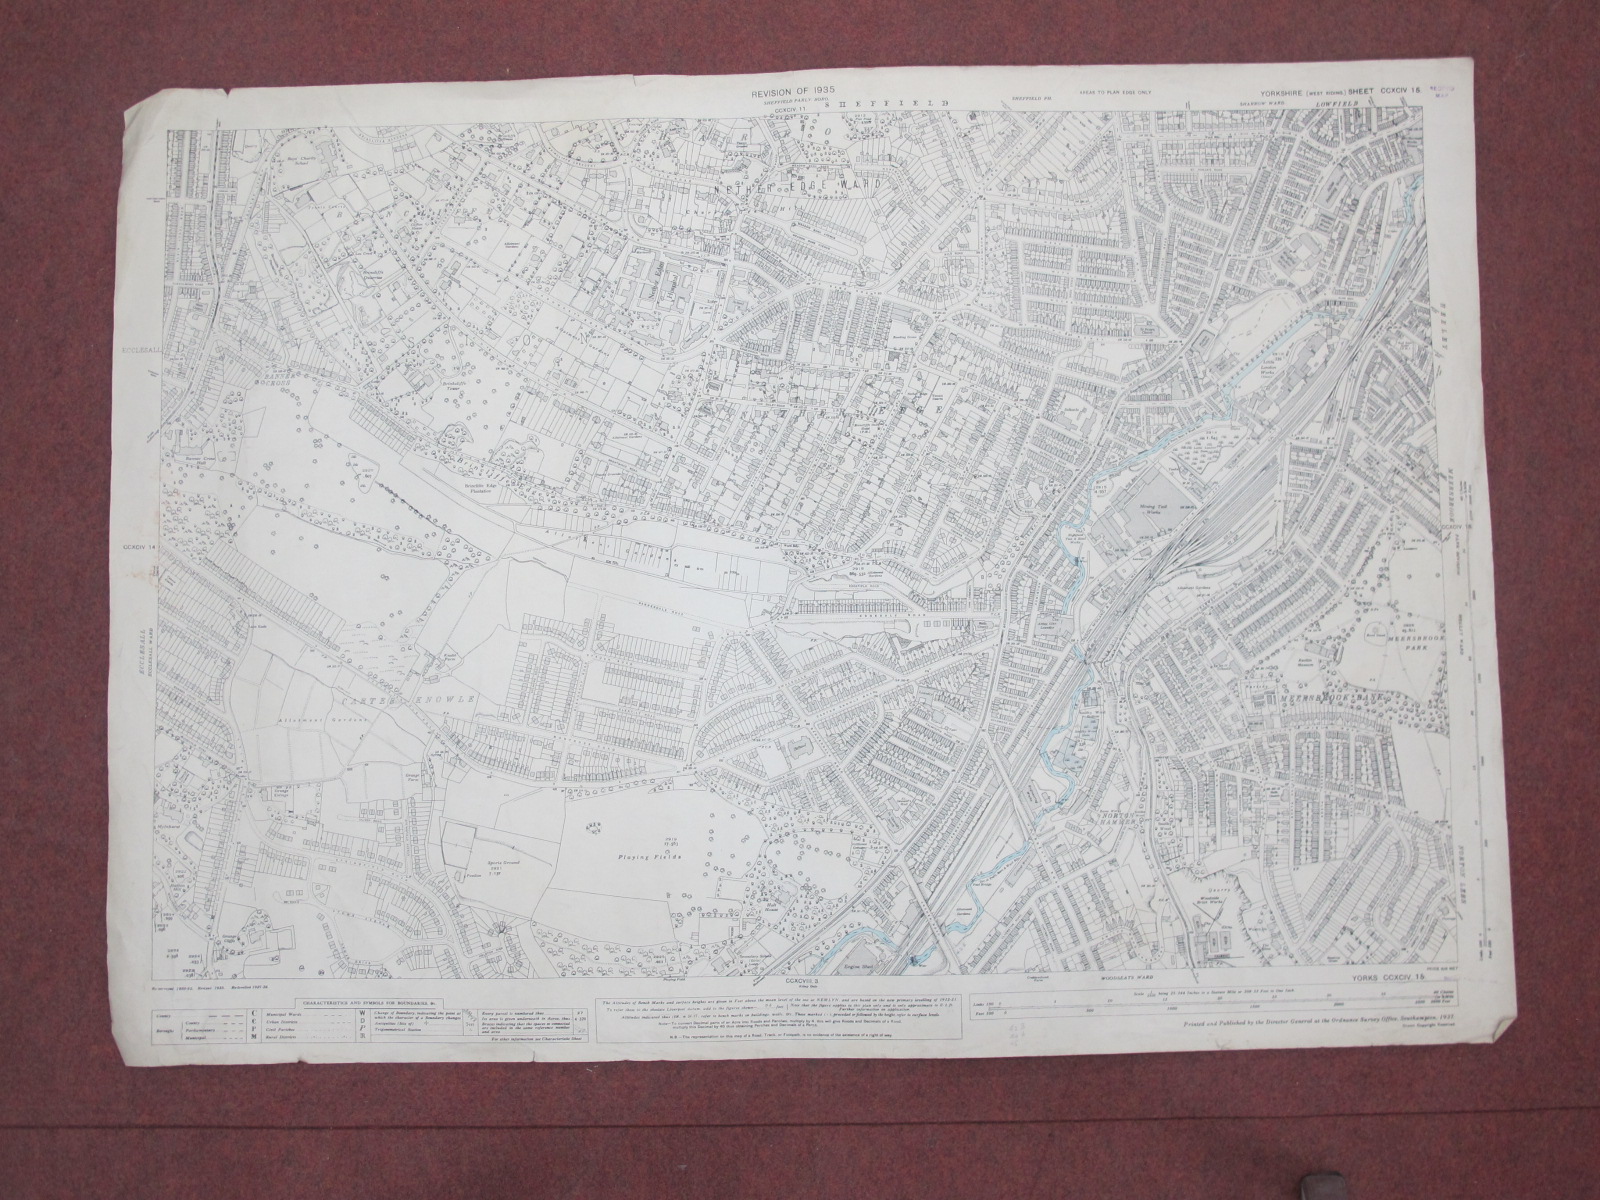 Derbyshire and Yorkshire Maps, some West Riding of Sheffield, to include City Centre, Neepsend, - Image 8 of 10